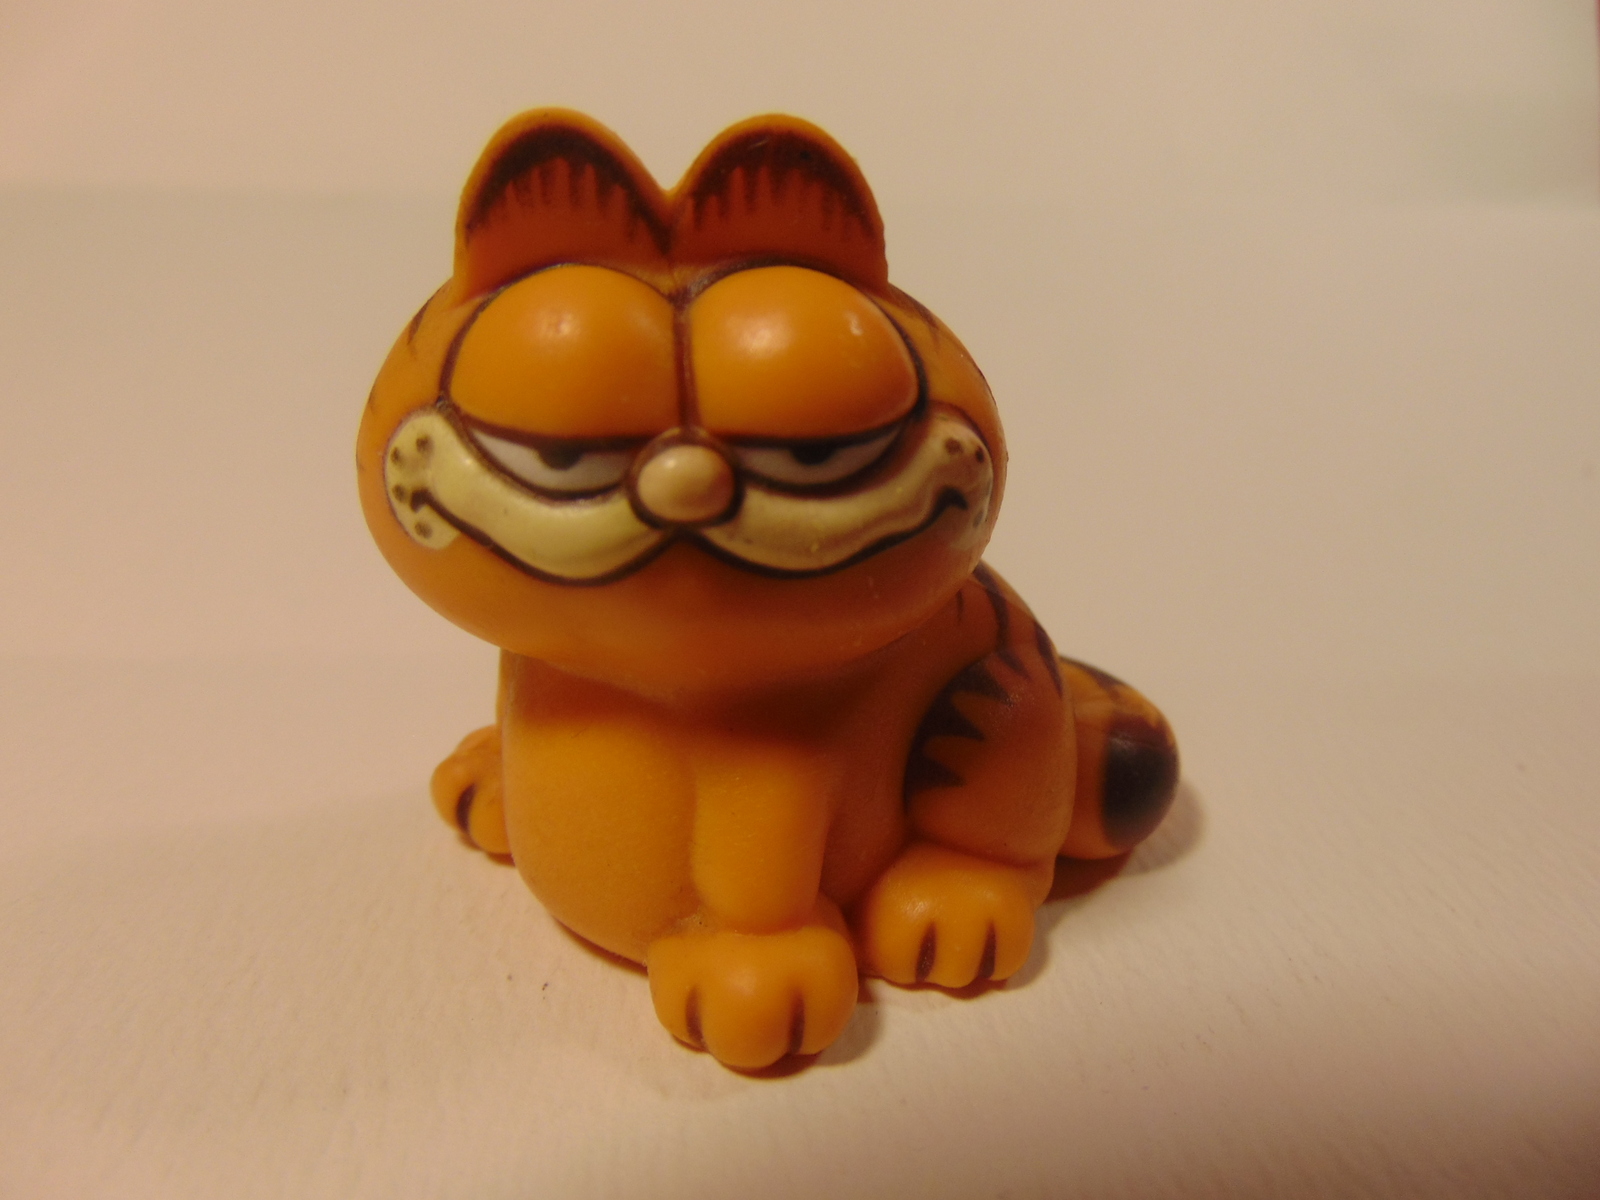 Primary image for 1 3/4", Garfield The Cat, Plastic Figurine. 1978, 1981 United Feature Syndicate.